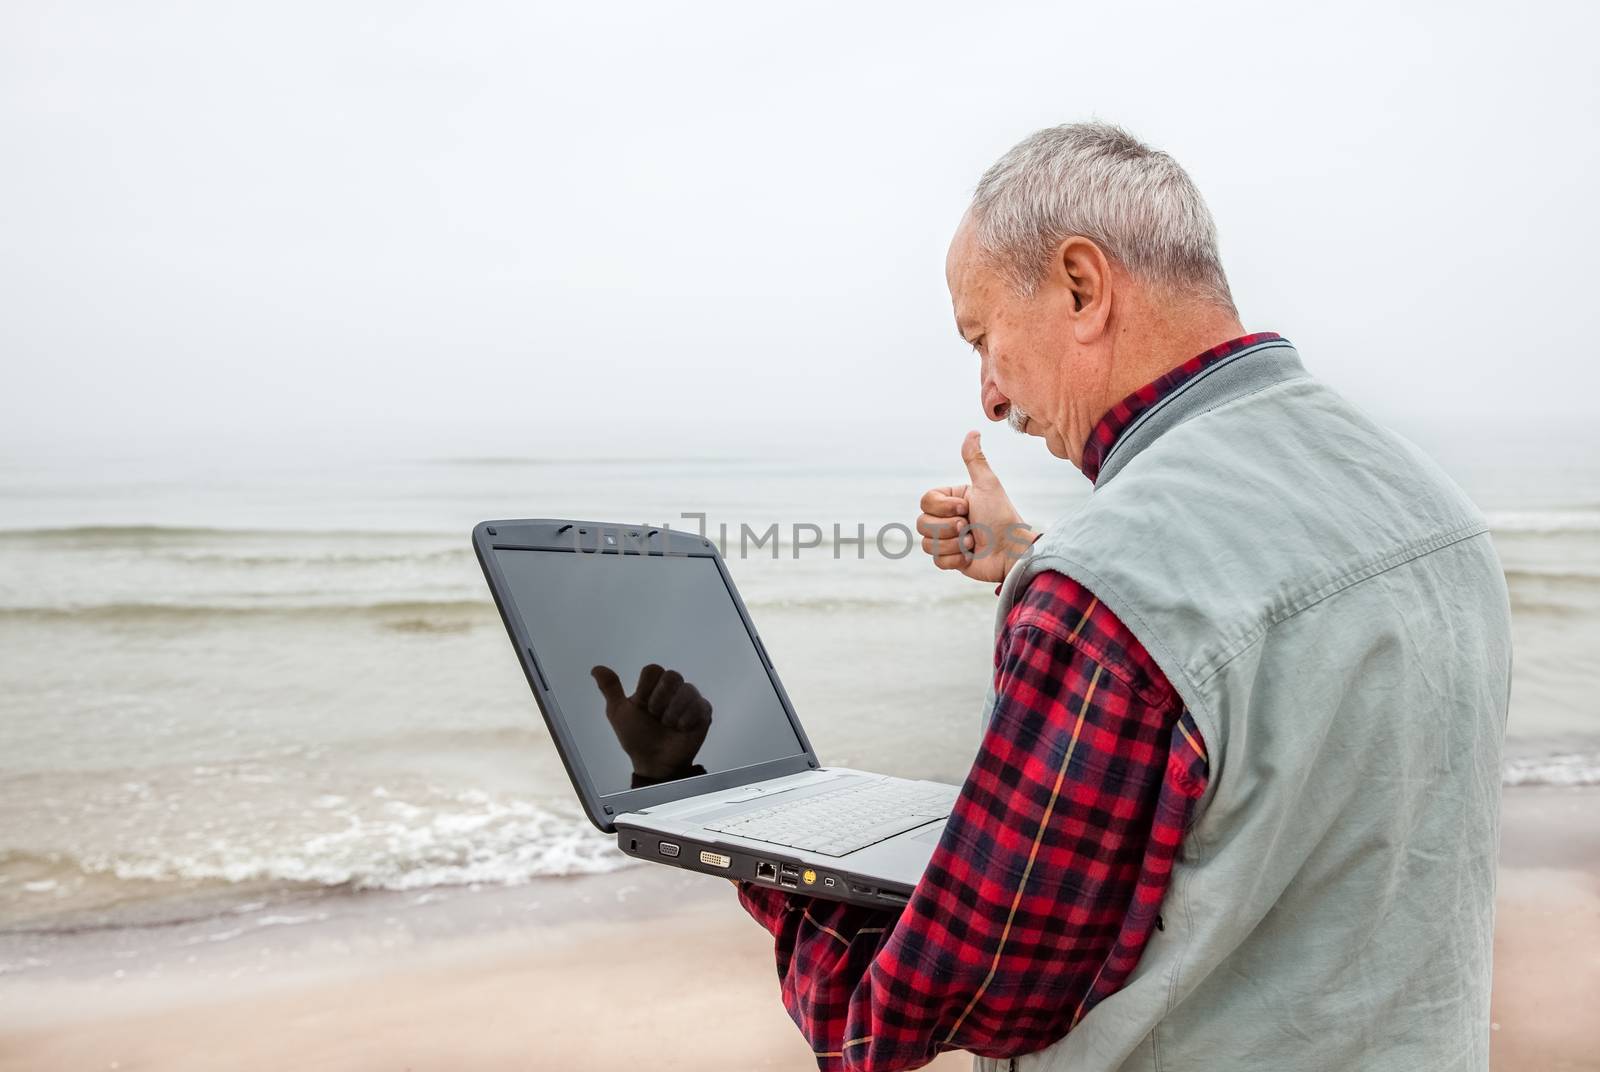 All OK. Old man standing on the beach with a laptop and a raised thumb up.